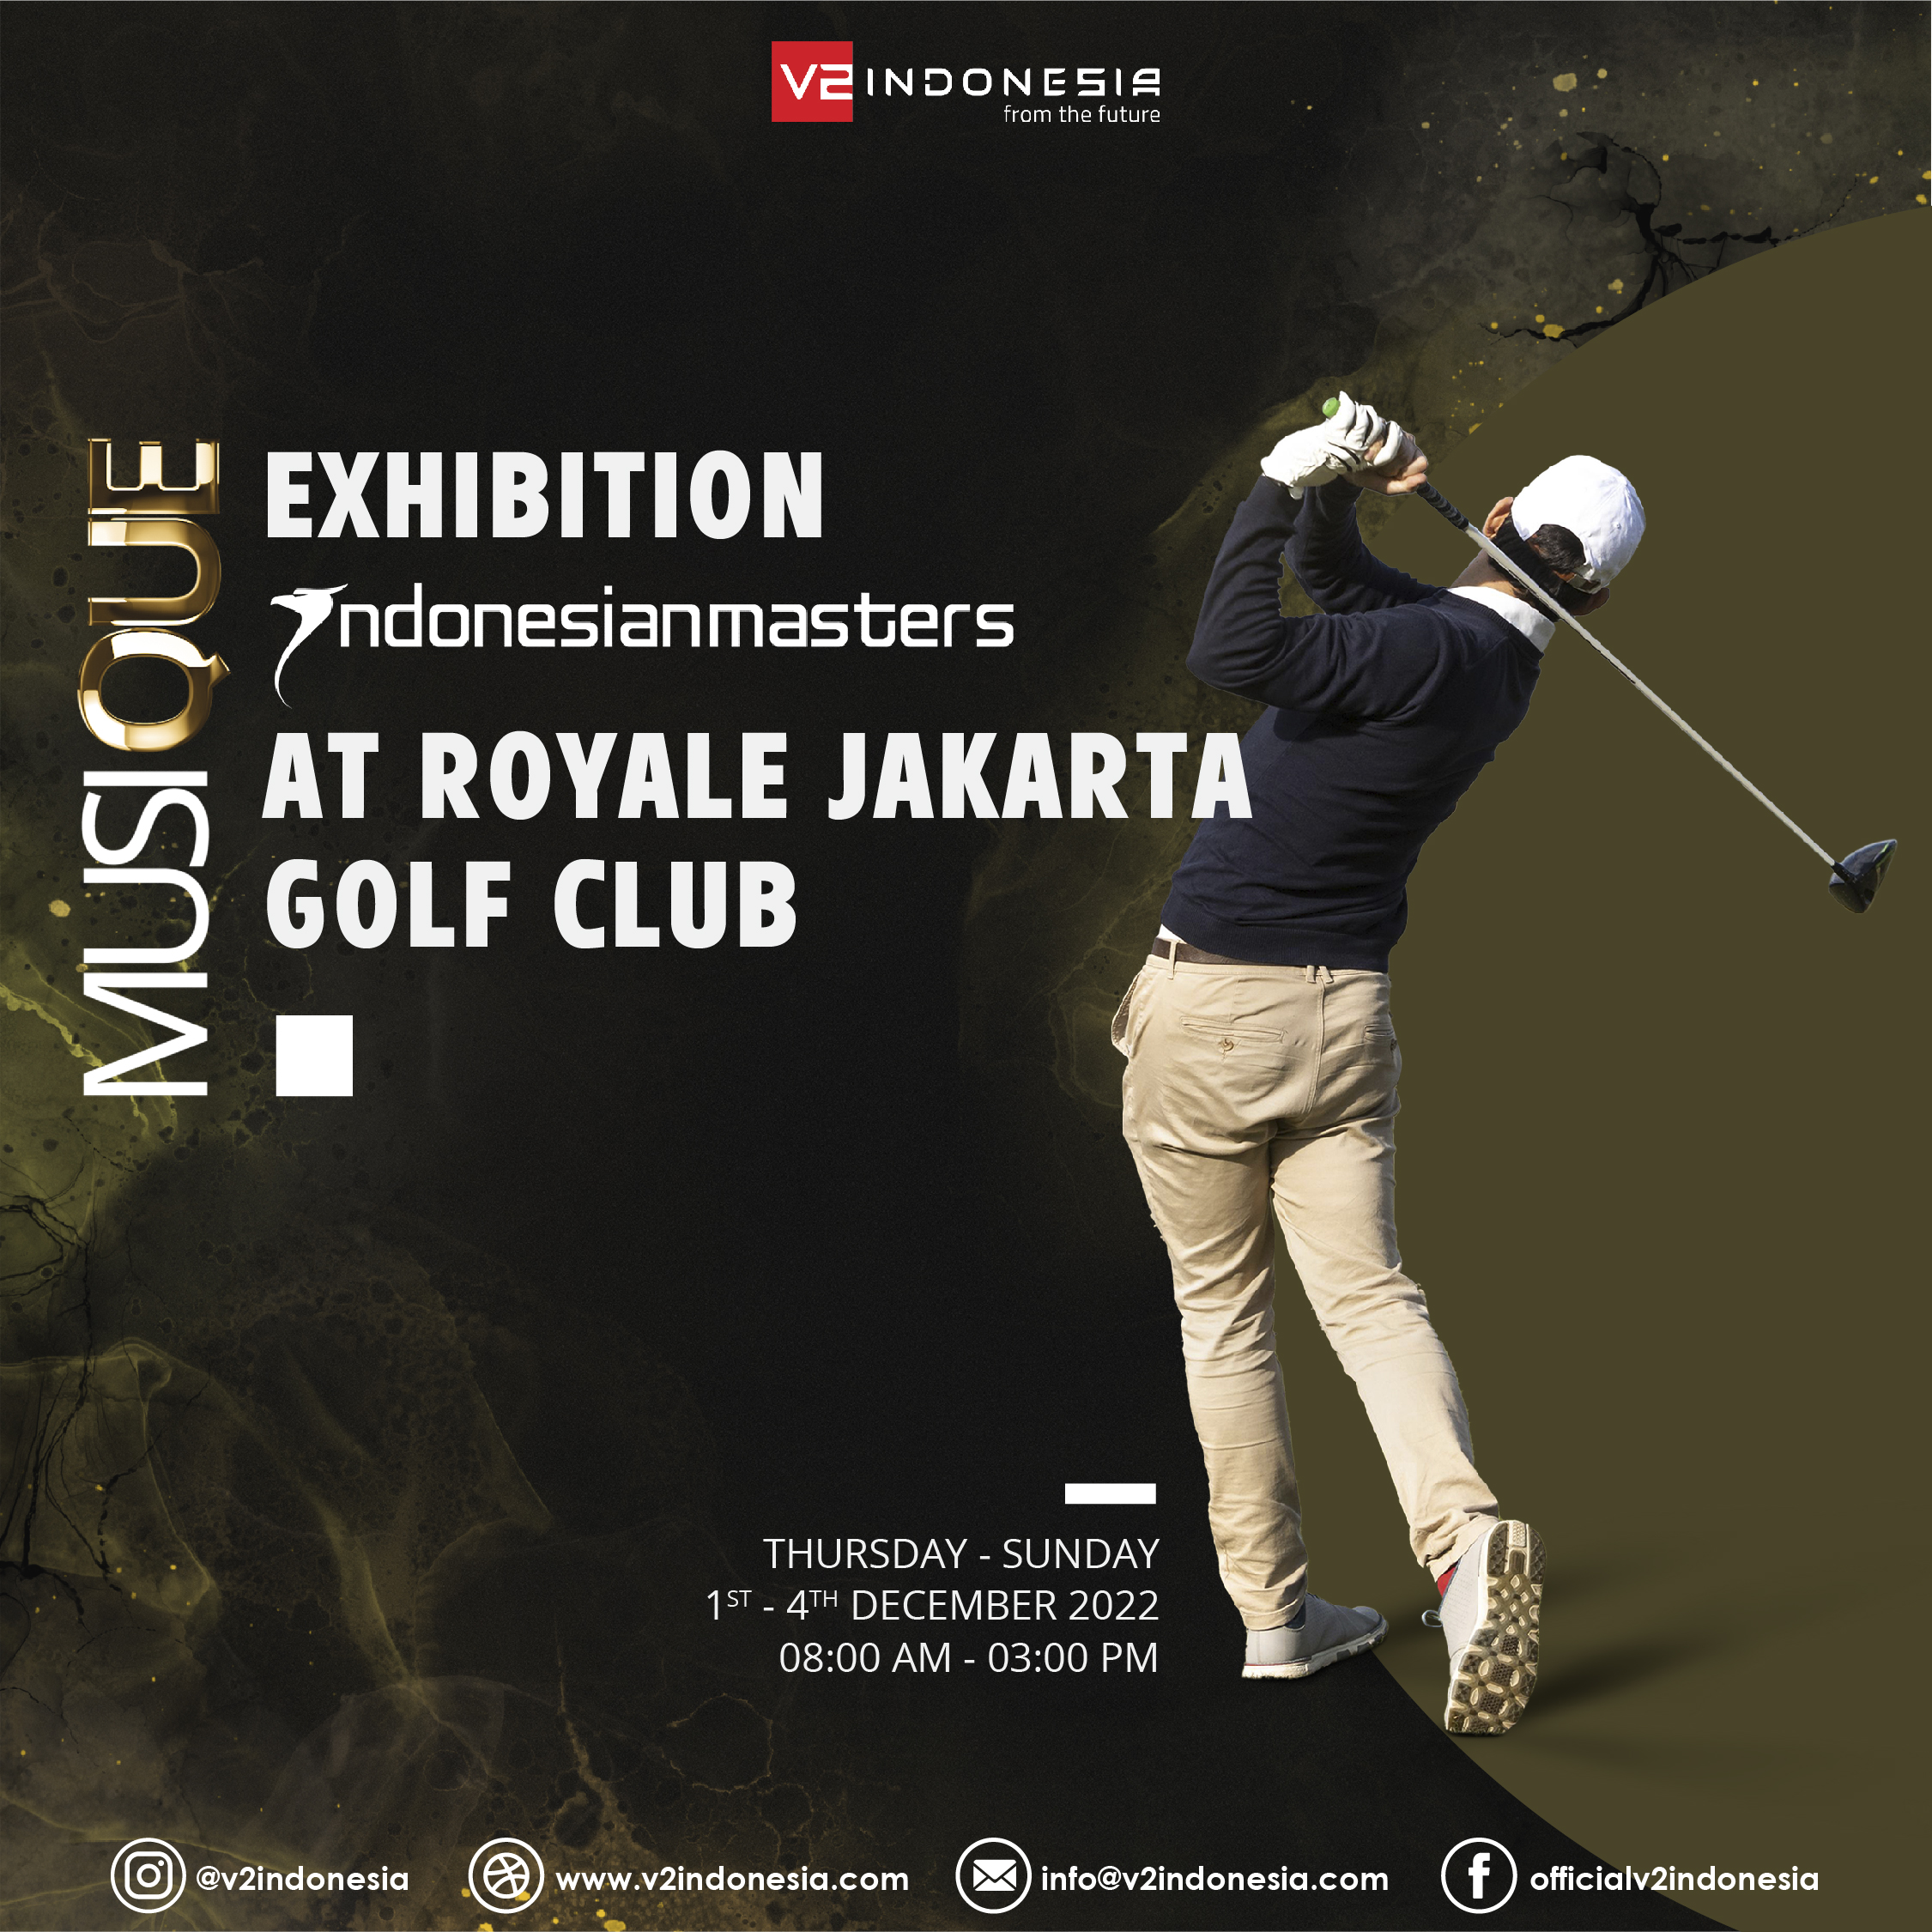 Musique Exhibiton at Event Indonesian Masters Royale Jakarta Golf Club